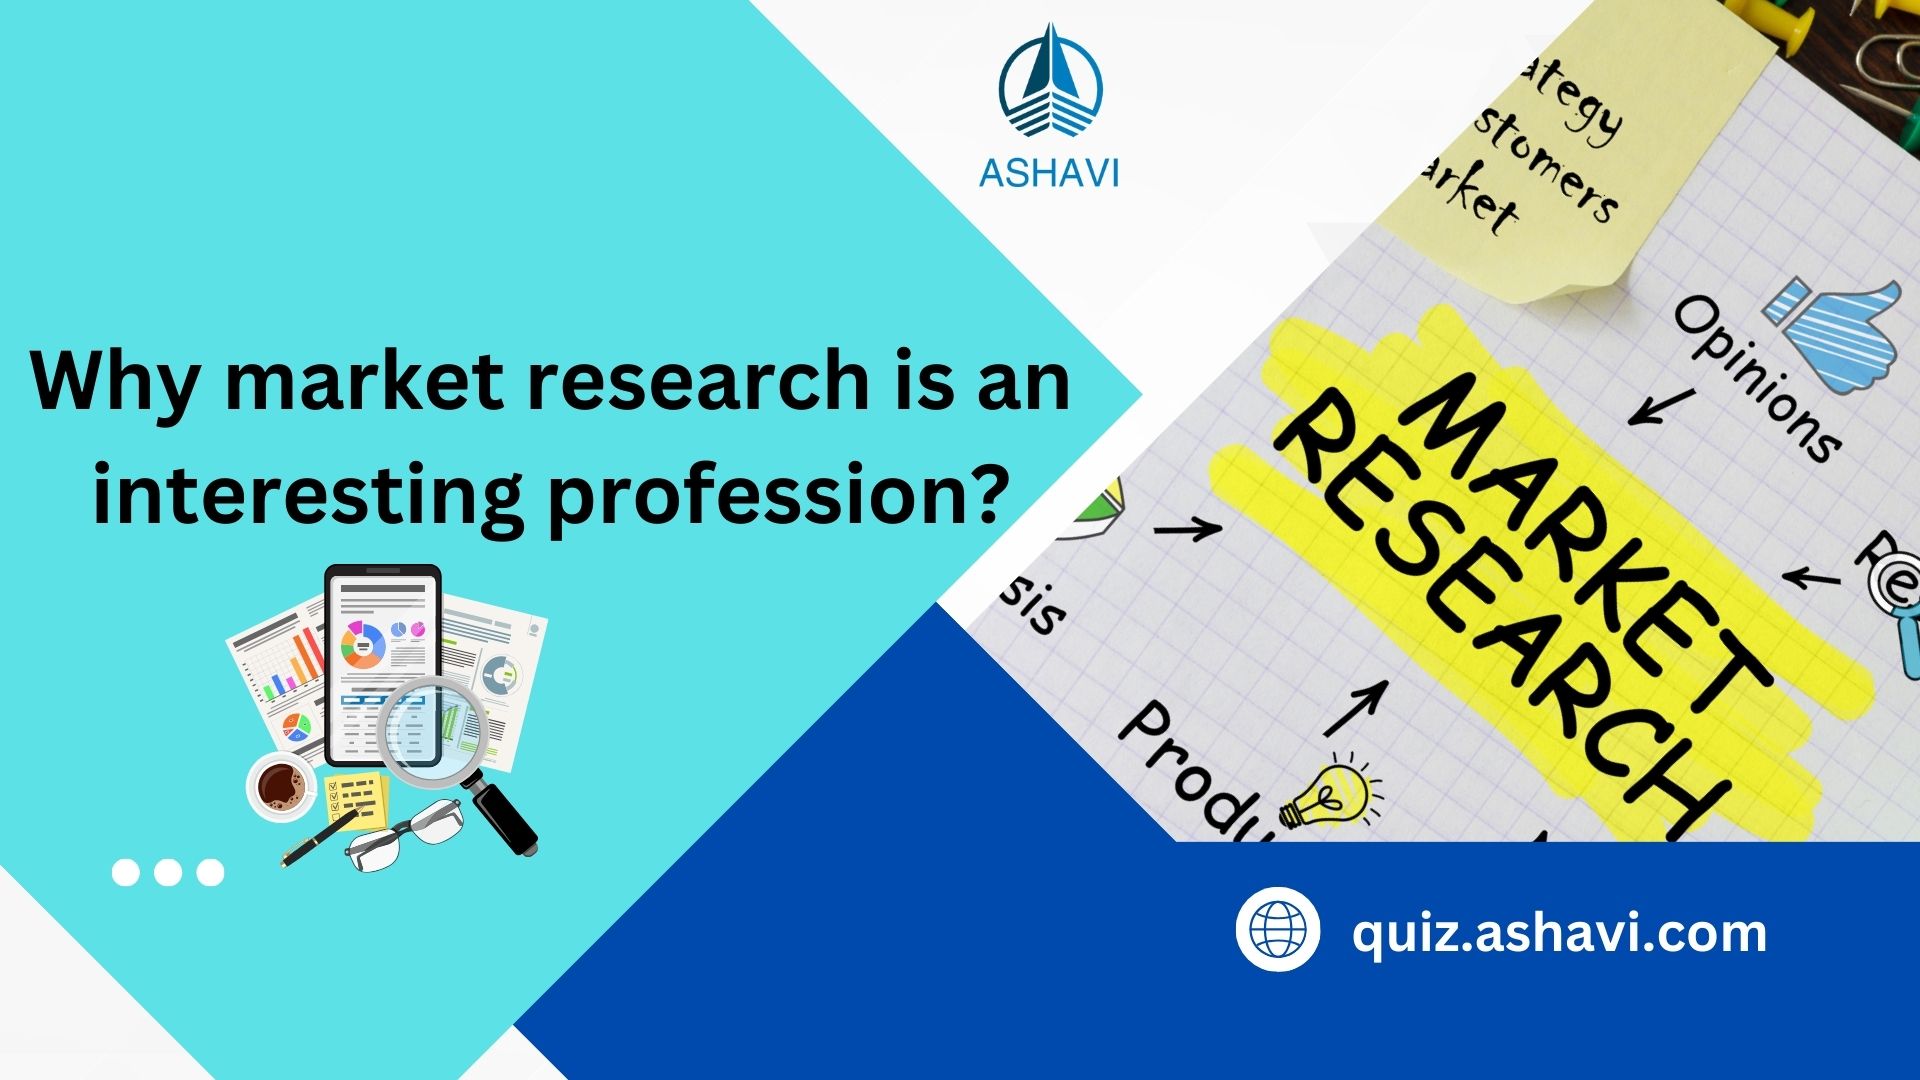 Why market research is an interesting profession?